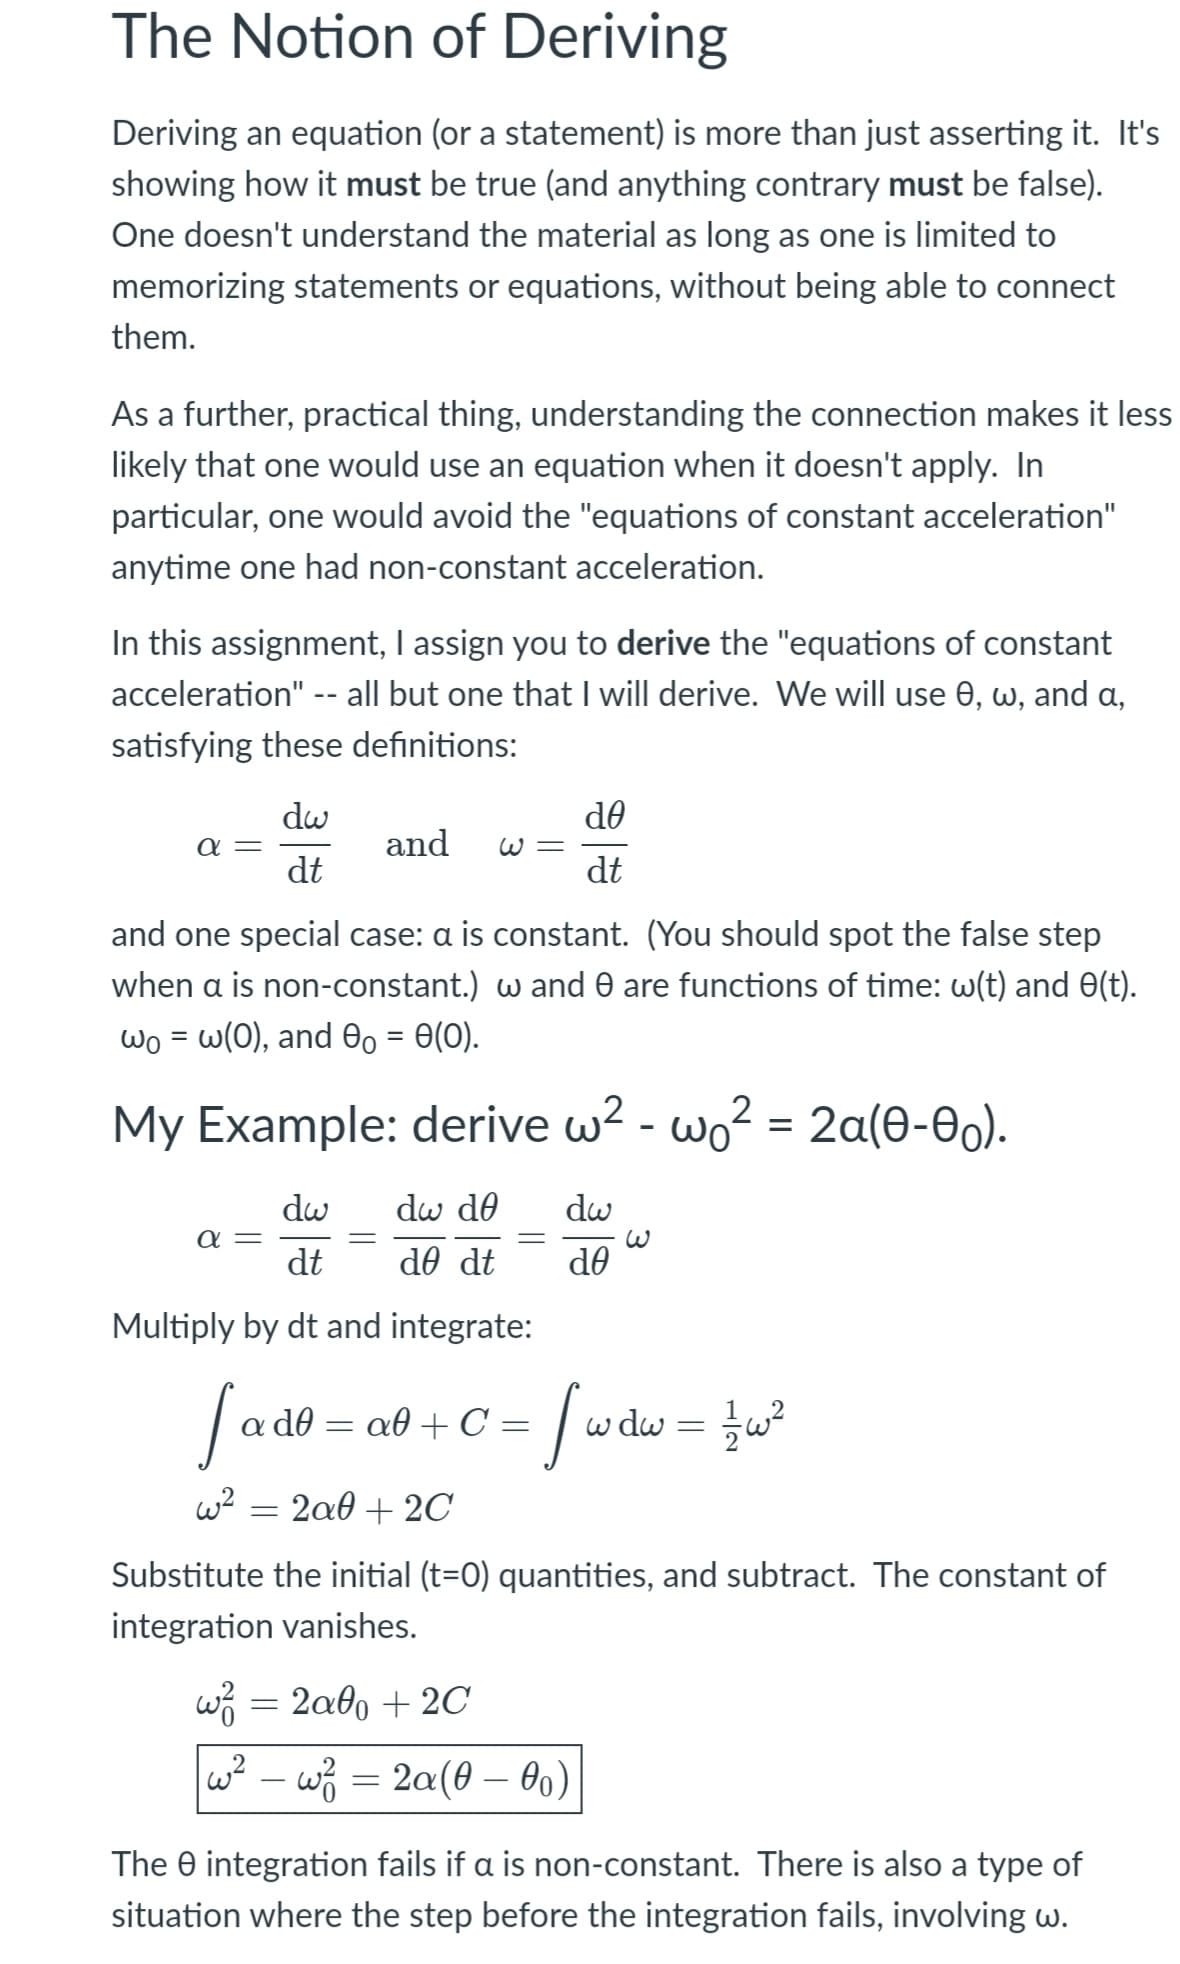 The Notion of Deriving
Deriving an equation (or a statement) is more than just asserting it. It's
showing how it must be true (and anything contrary must be false).
One doesn't understand the material as long as one is limited to
memorizing statements or equations, without being able to connect
them.
As a further, practical thing, understanding the connection makes it less
likely that one would use an equation when it doesn't apply. In
particular, one would avoid the "equations of constant acceleration"
anytime one had non-constant acceleration.
In this assignment, I assign you to derive the "equations of constant
acceleration" -- all but one that I will derive. We will use 0, w, and a,
satisfying these definitions:
dw
de
and
a =
dt
W =
dt
and one special case: a is constant. (You should spot the false step
when a is non-constant.) w and 0 are functions of time: w(t) and 0(t).
ωο- ω(0), and θ0-θ(0).
My Example: derive w2 - wo? = 2a(0-0).
dw
dw de
dw
a =
dt
de dt
de
Multiply by dt and integrate:
Sado
w dw = w?
d0 = a0 + C =
w?
2a0 + 2C
Substitute the initial (t=0) quantities, and subtract. The constant of
integration vanishes.
w3 = 2a0 + 2C
w? – w = 2a(0 – 0o)
The e integration fails if a is non-constant. There is also a type of
situation where the step before the integration fails, involving w.
